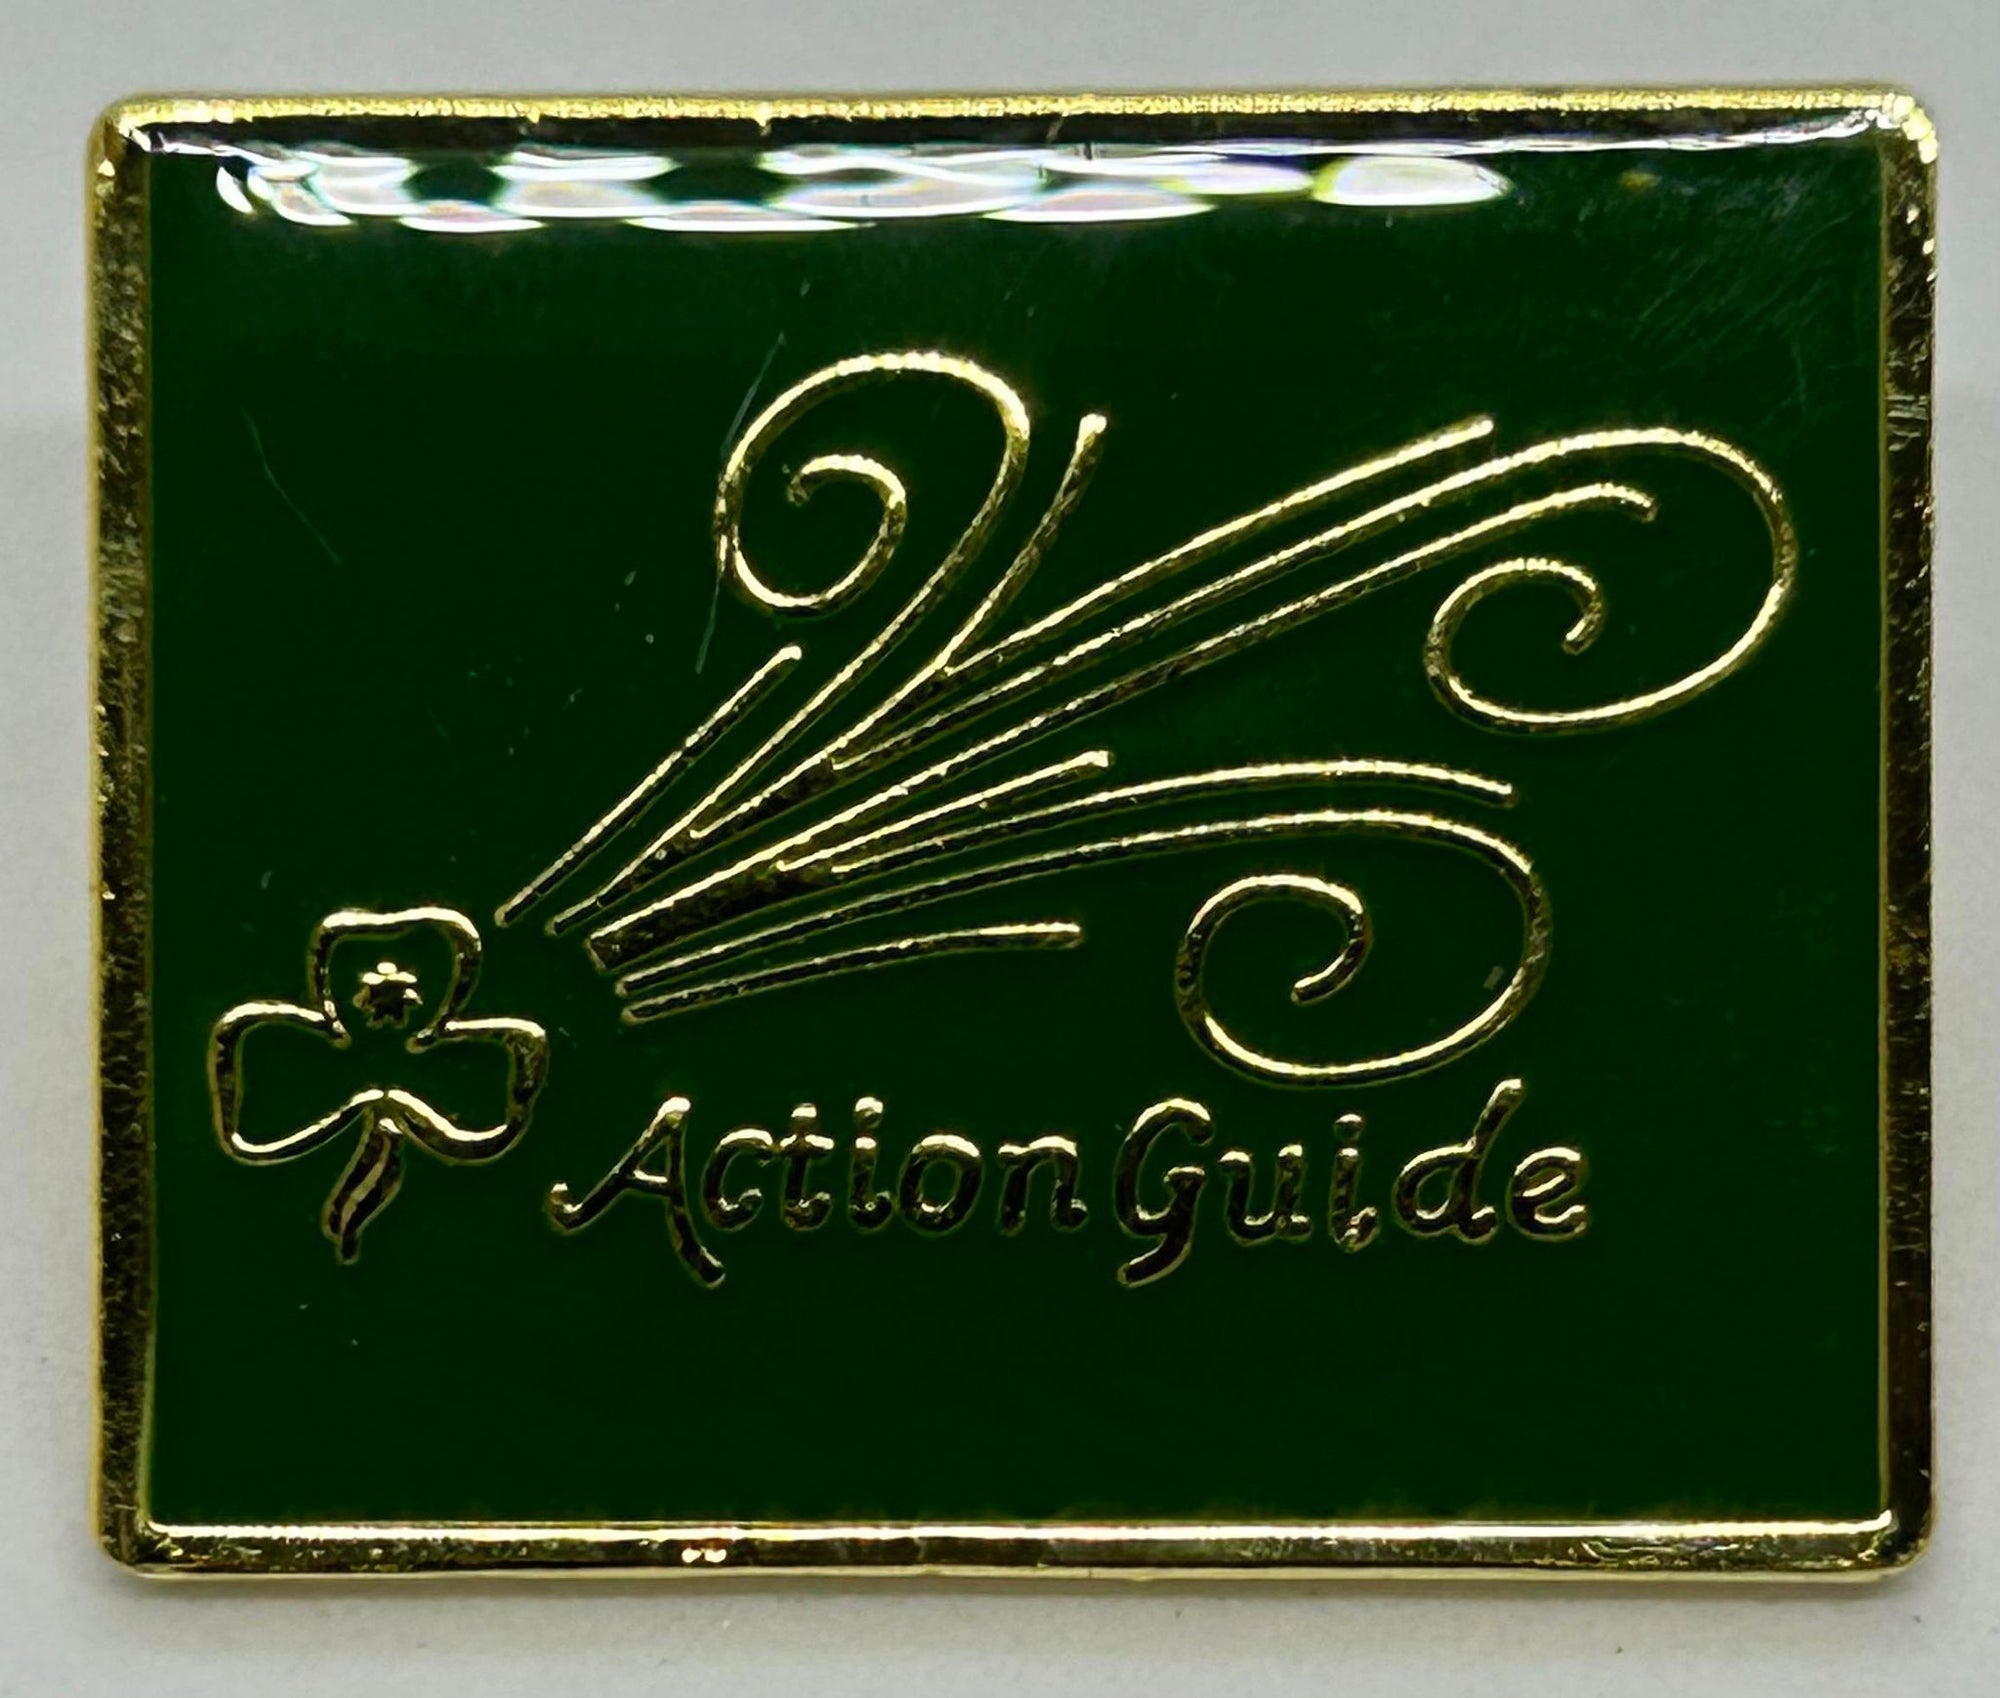 a green enamel badge with a trefoil, swirls and action guide in gold on the front